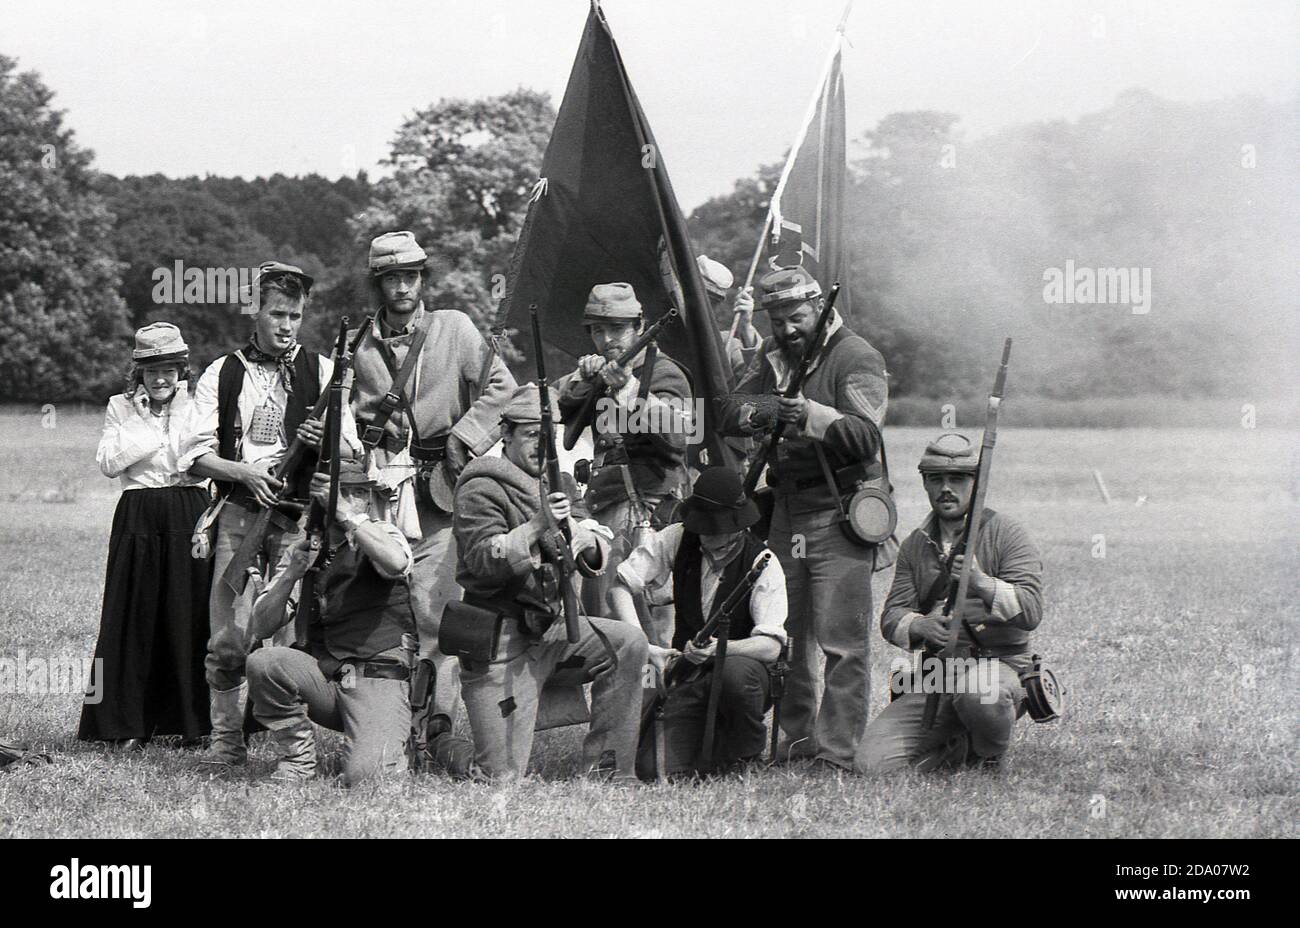 1980s, historical, outside in a field, history enthusiasts in costumes taking part in an American civil war re-enactment, dressed up as soliders in army uniforms, with old rifles and flags, England, UK. Stock Photo